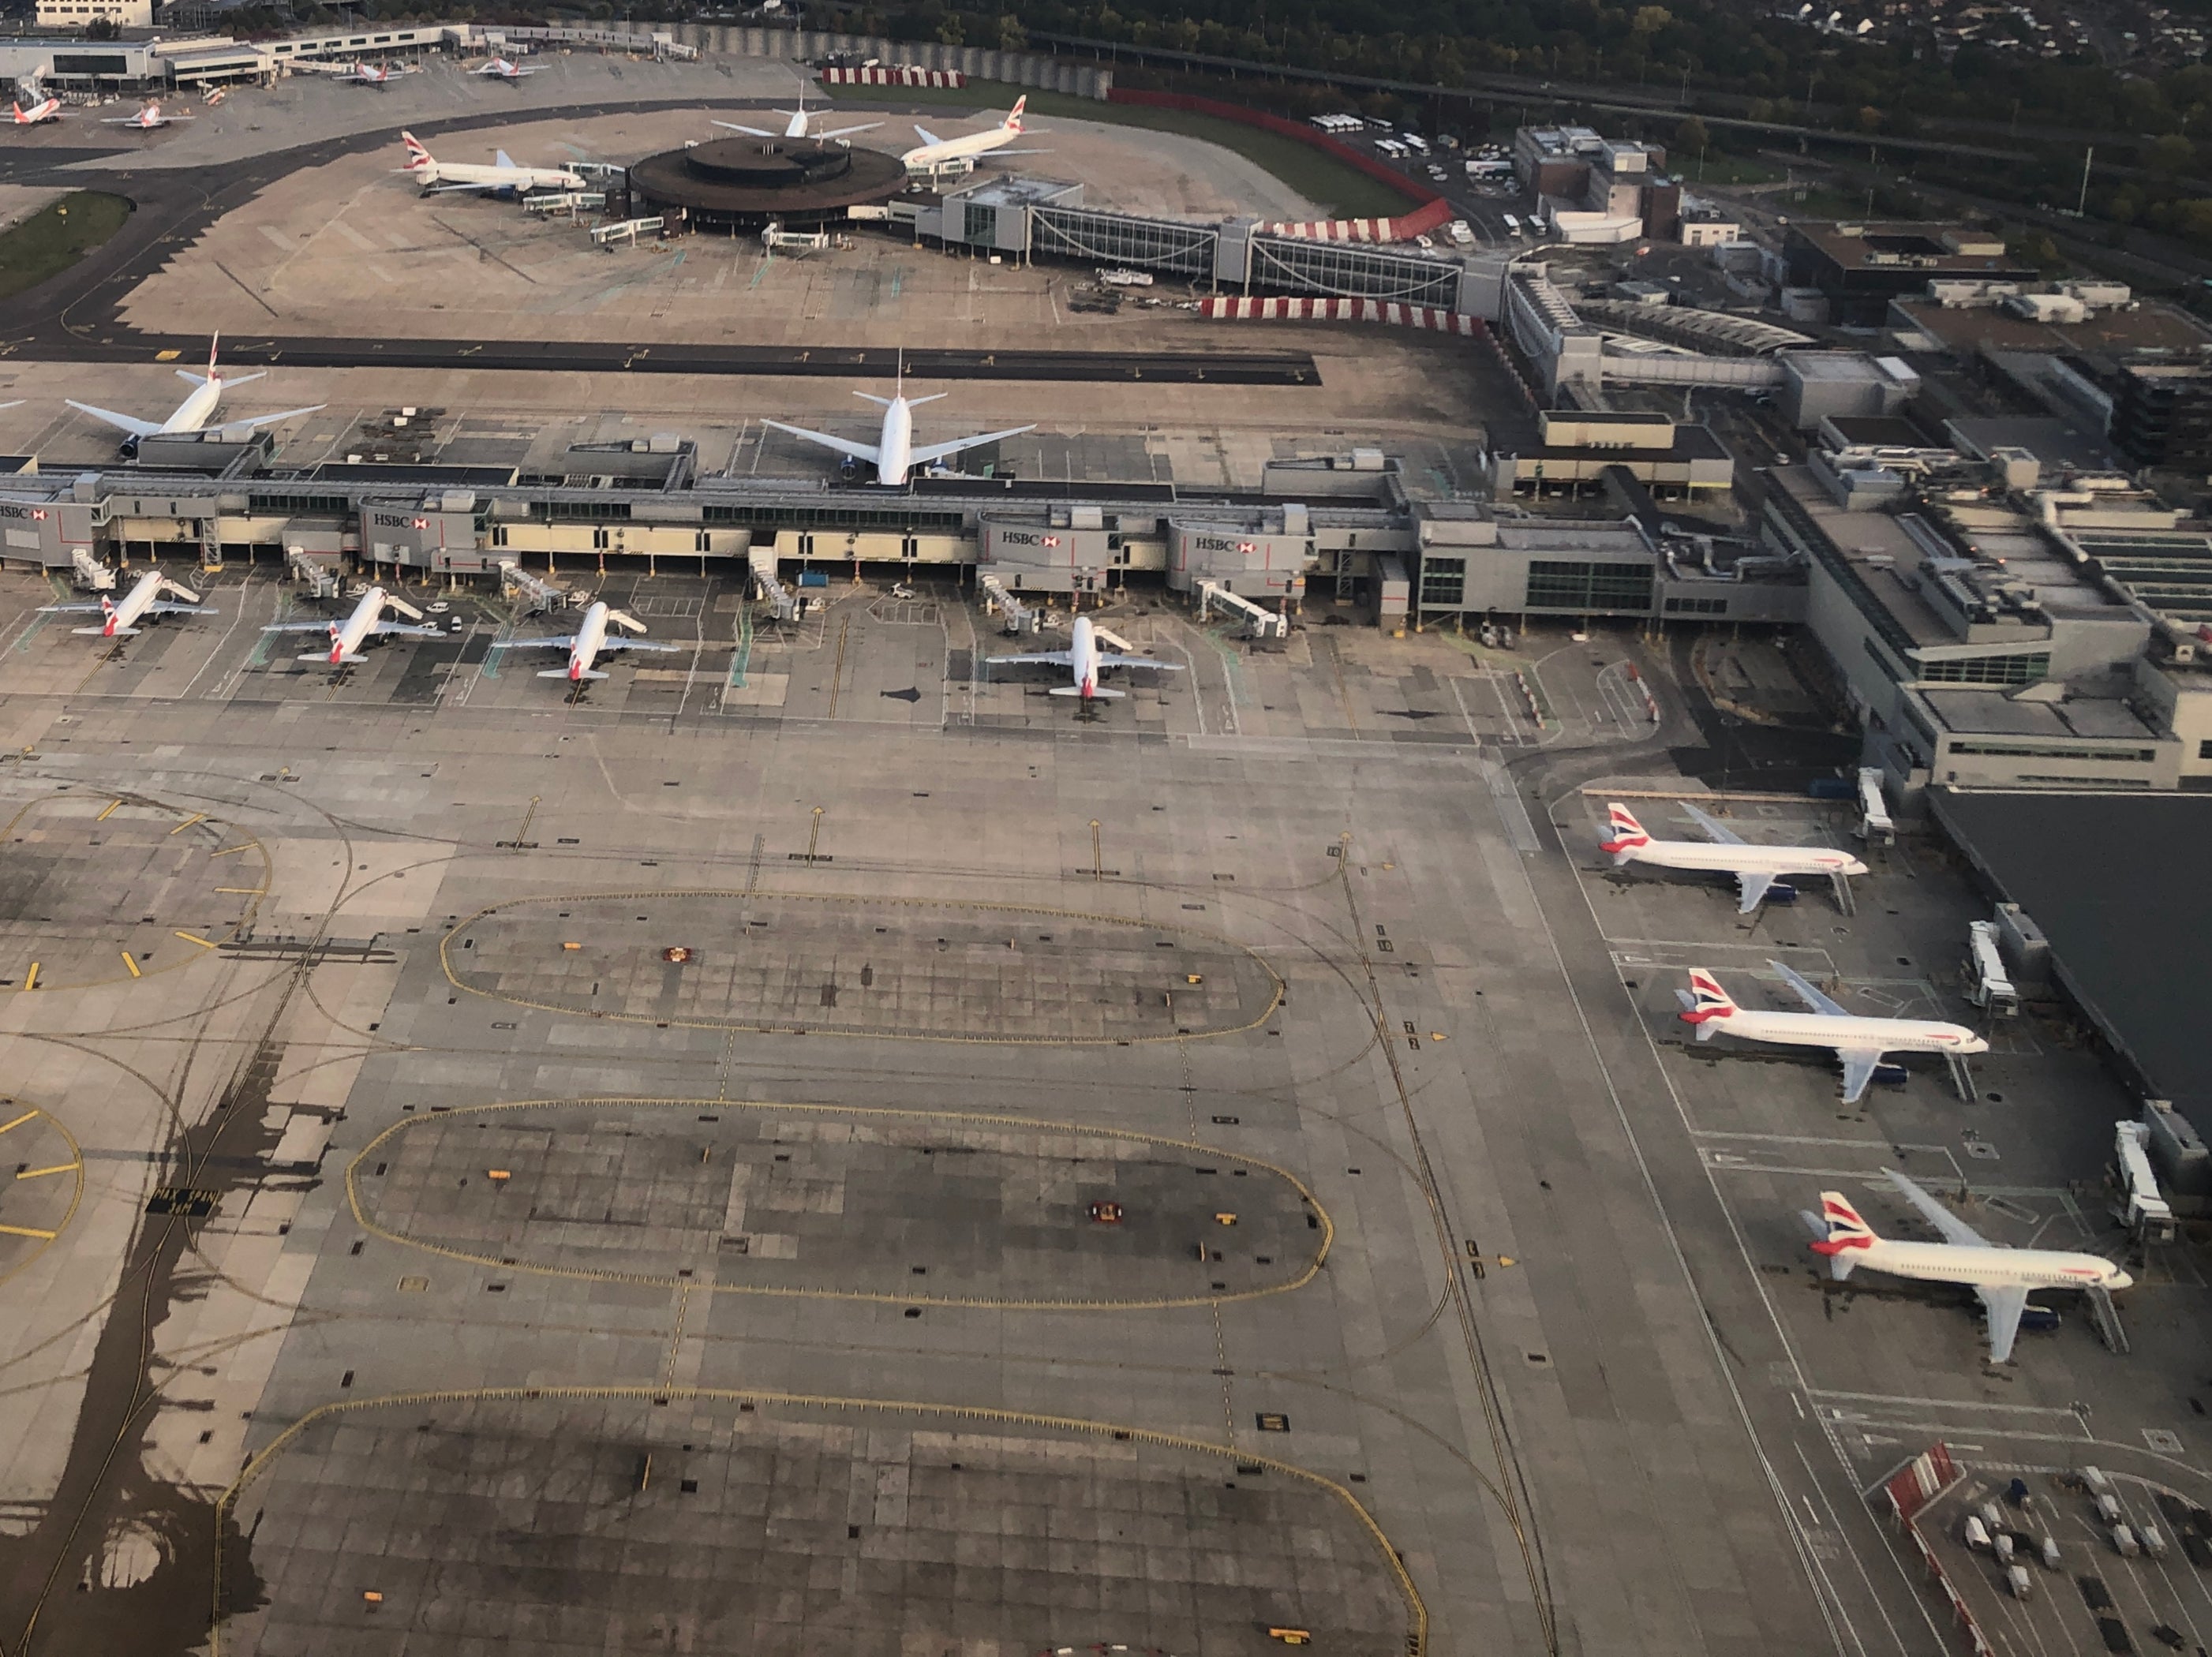 Going nowhere: Planes standing empty at Gatwick’s South Terminal, which is currently closed